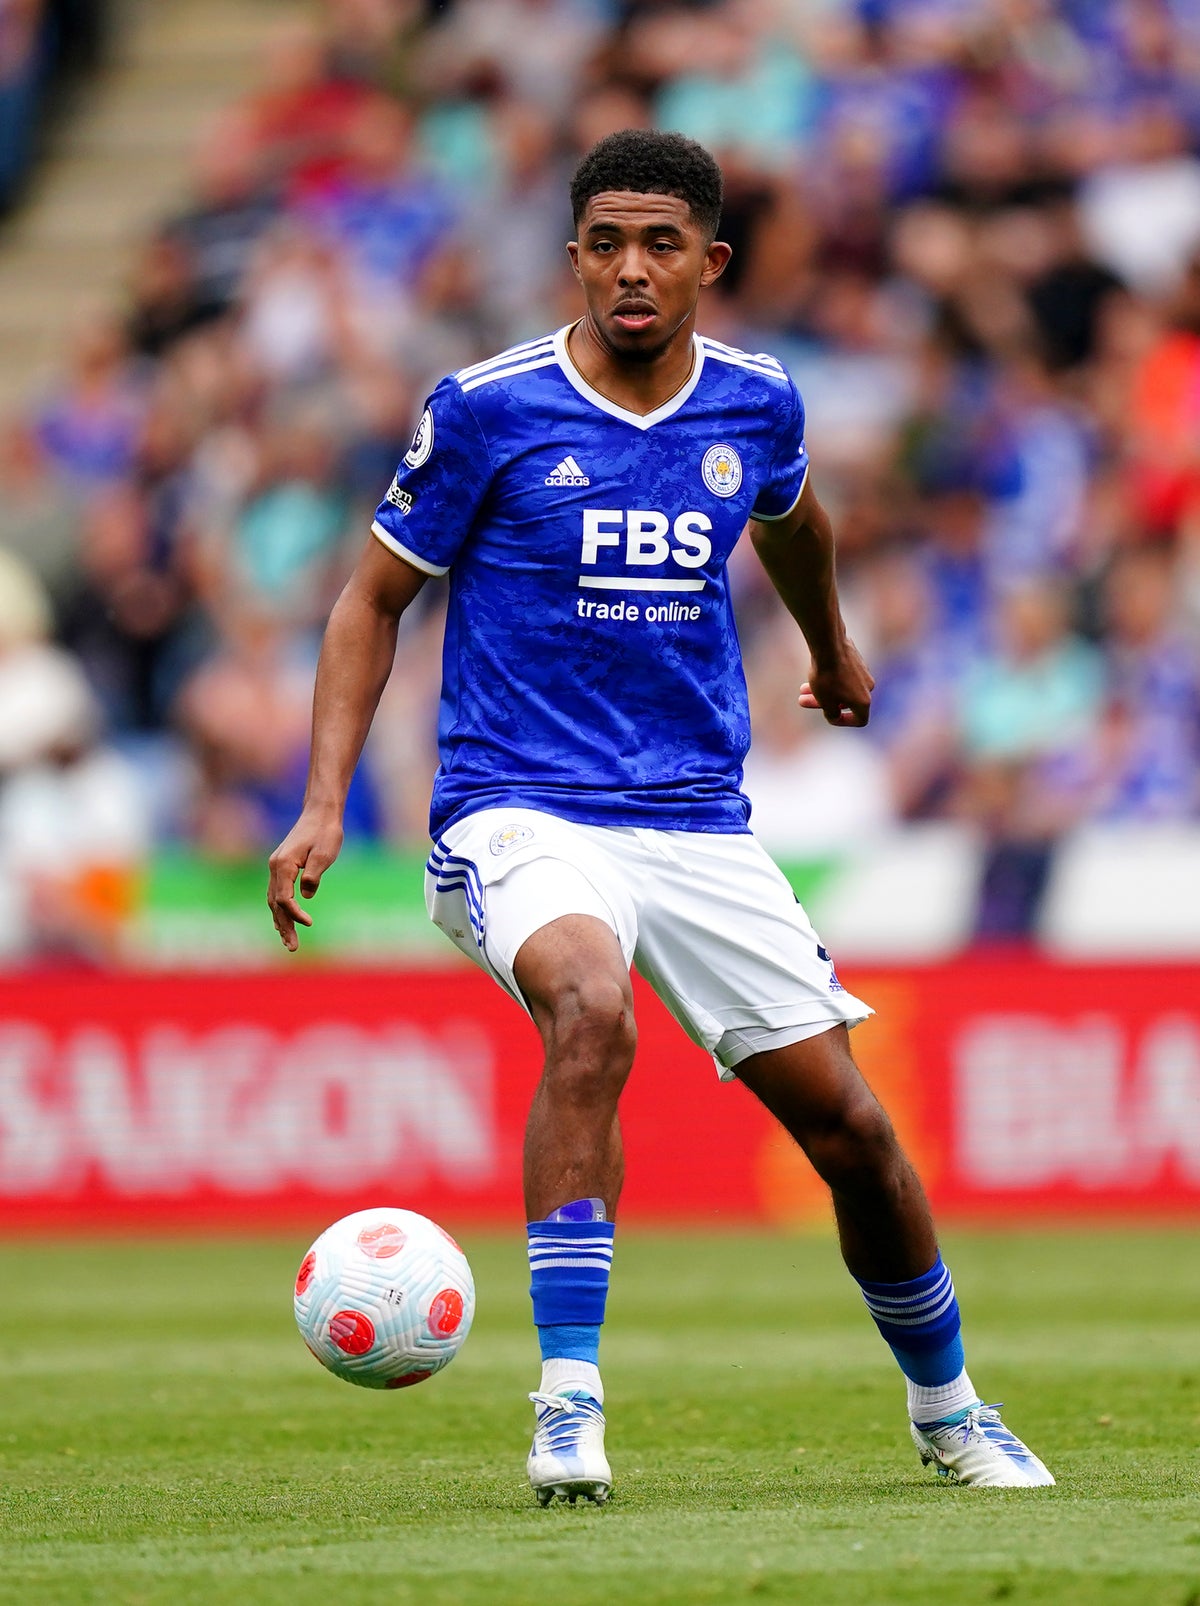 ‘It’s a difficult moment for him’: Brendan Rodgers provides Wesley Fofana update amid Chelsea speculation